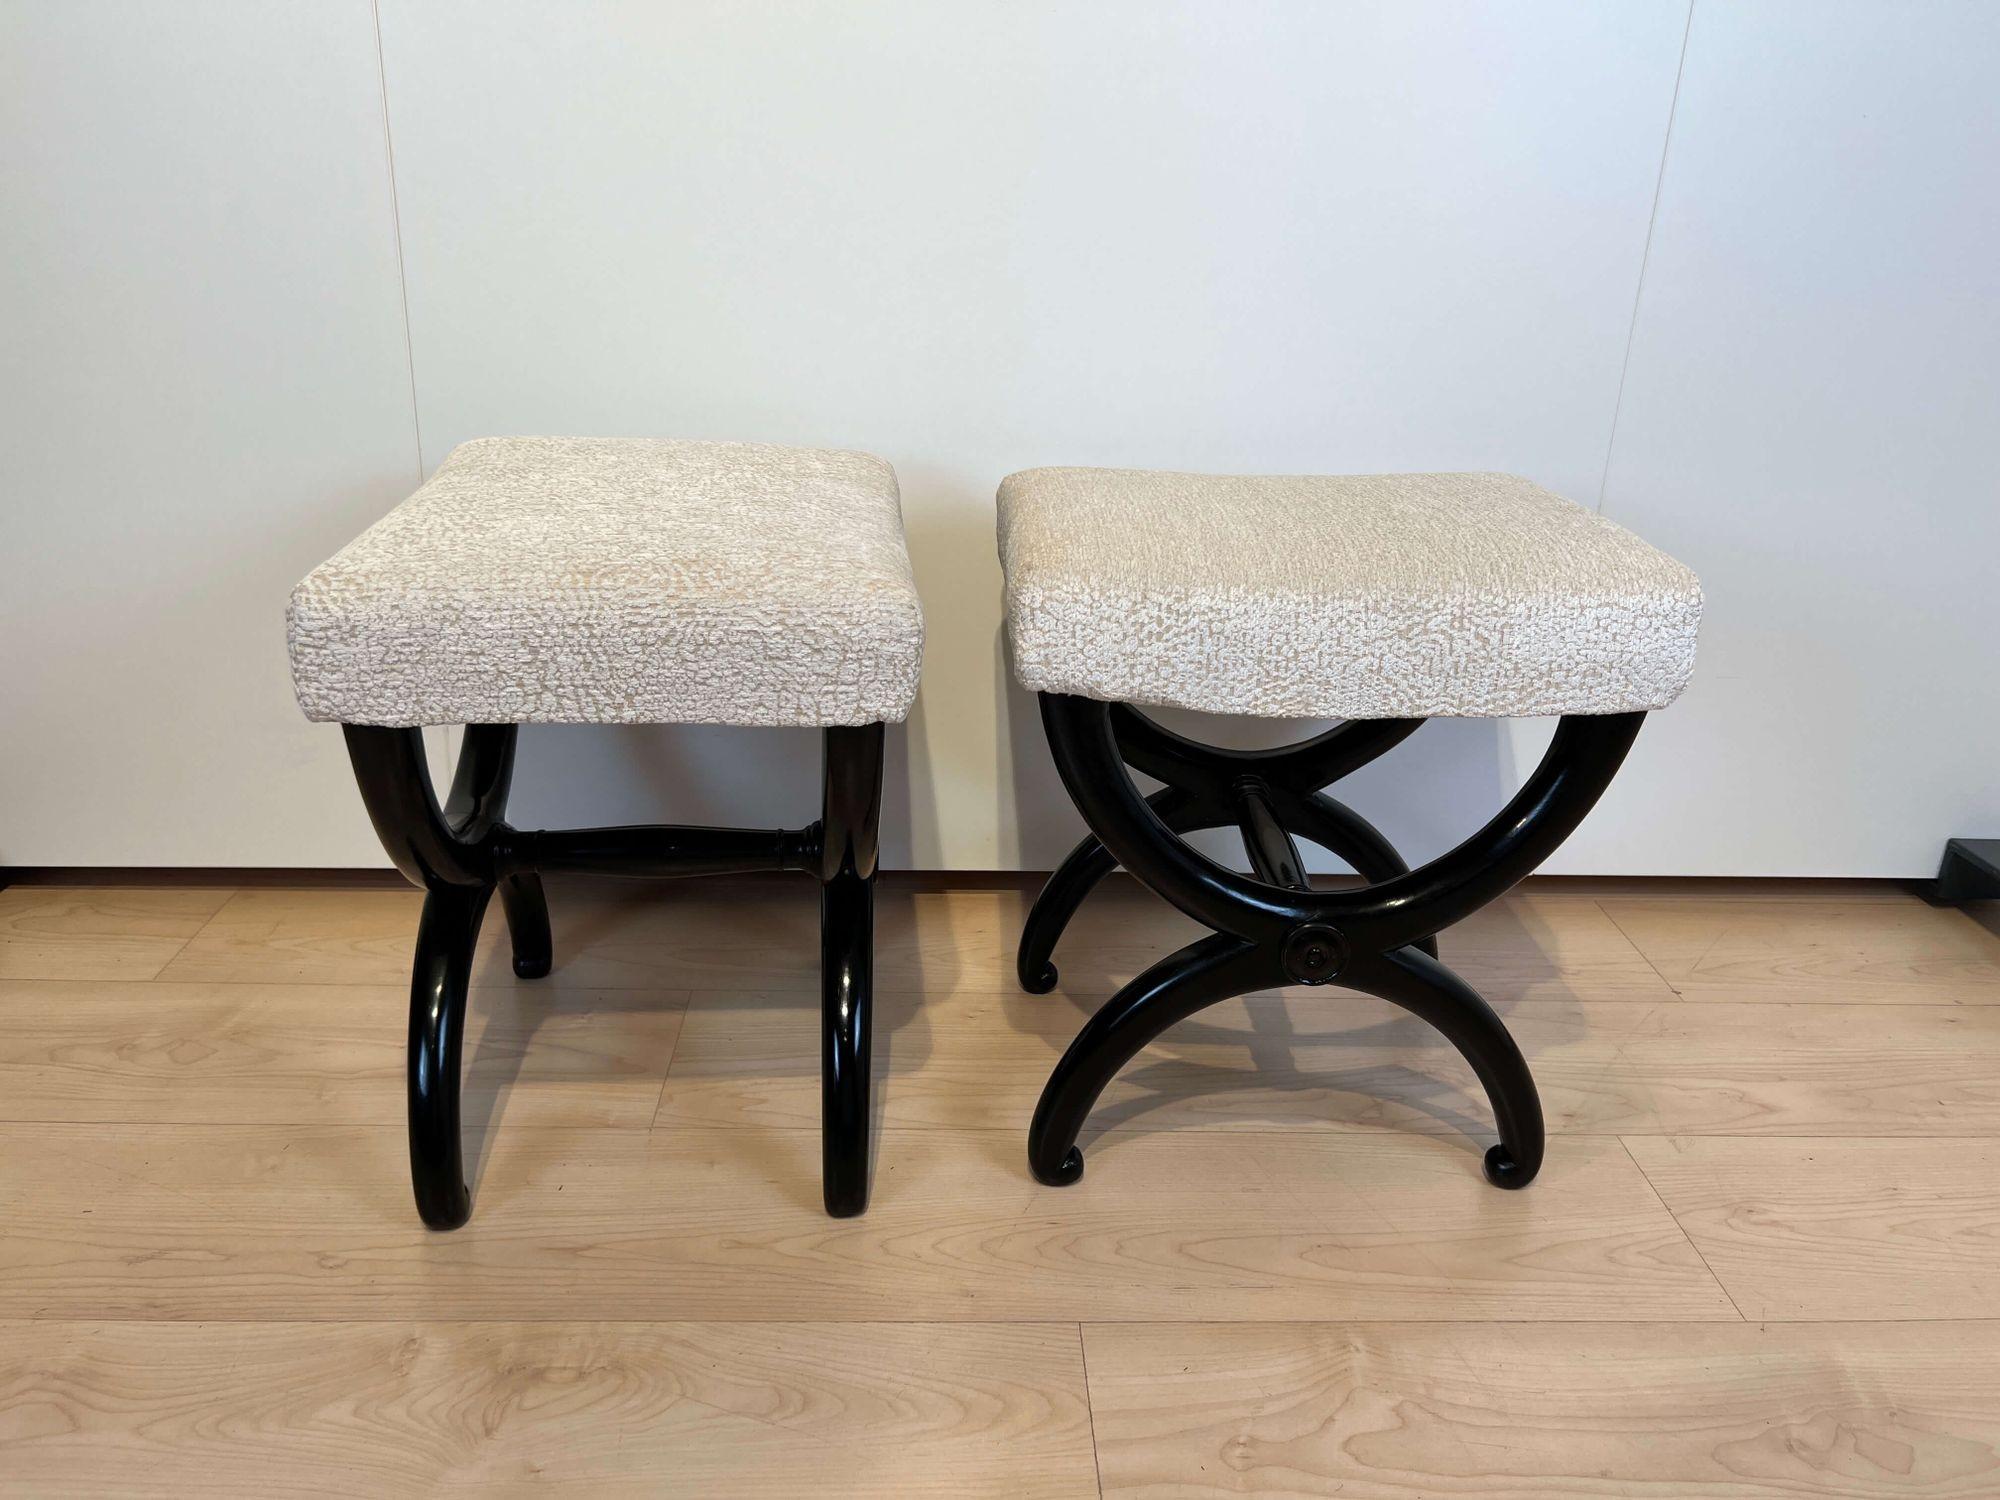 Neoclassical Pair of Antique Stools, Ebonized Beech Wood, Creme Fabric, France circa 1820 For Sale